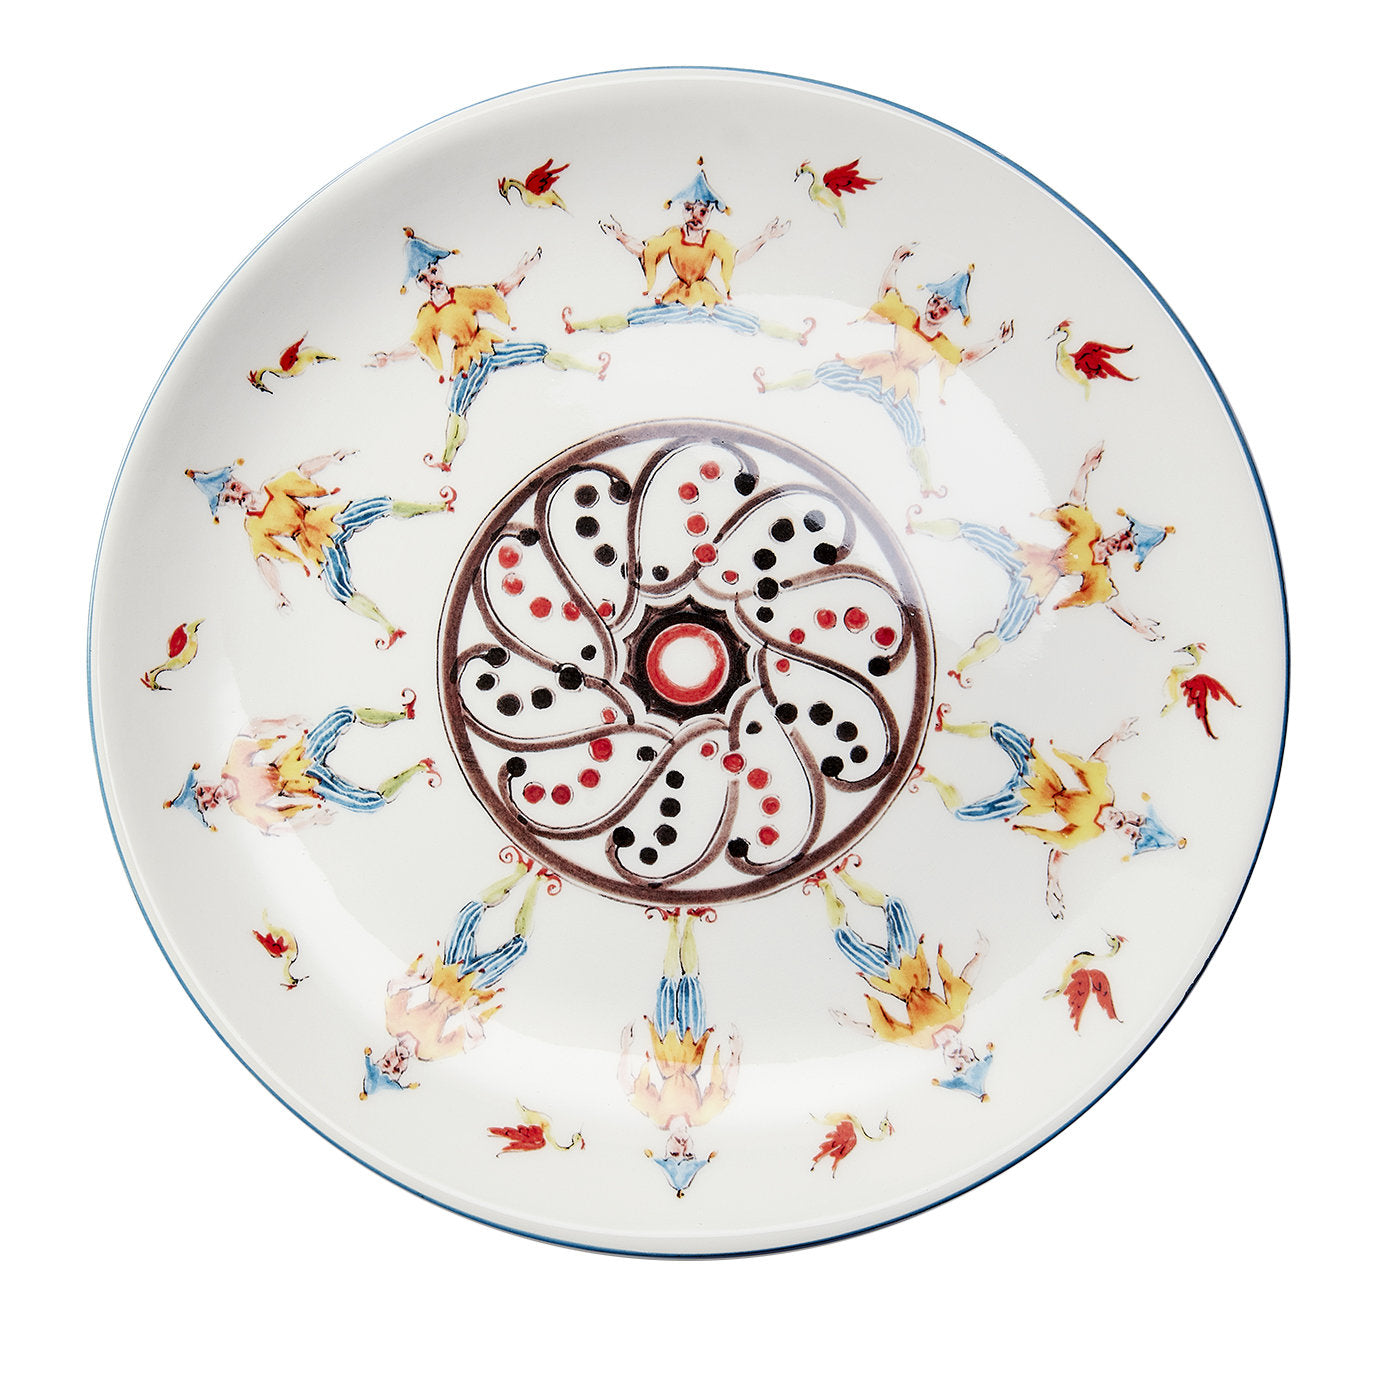 Play Plates Story N°2 Dinner Plates Set of 4 - Alternative view 1